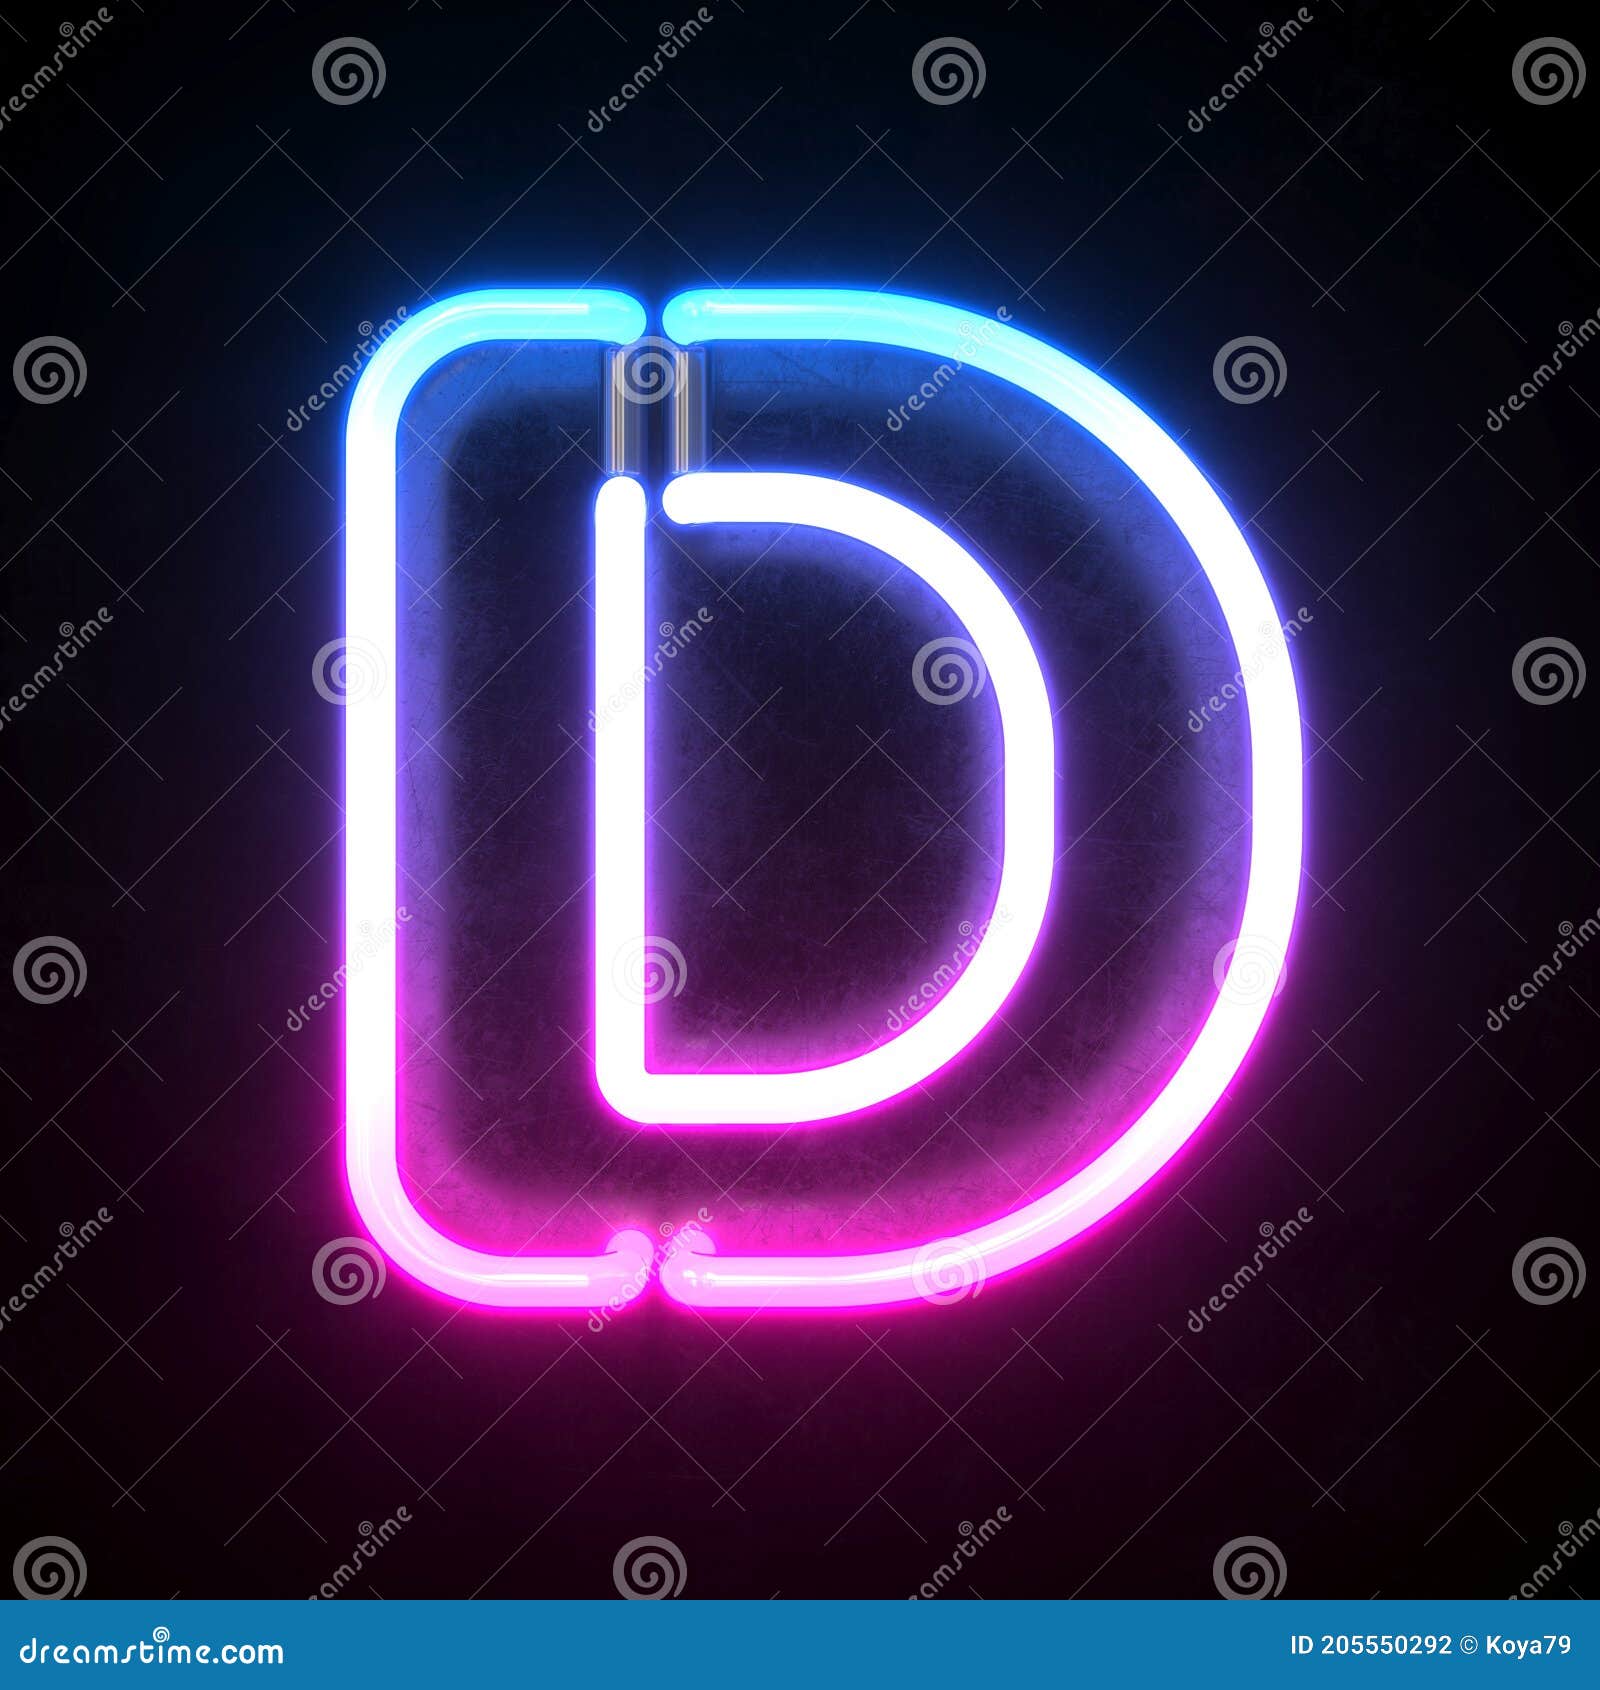 Neon 3d Font, Blue and Pink Neon Light 3d Rendering, Letter D Stock ...